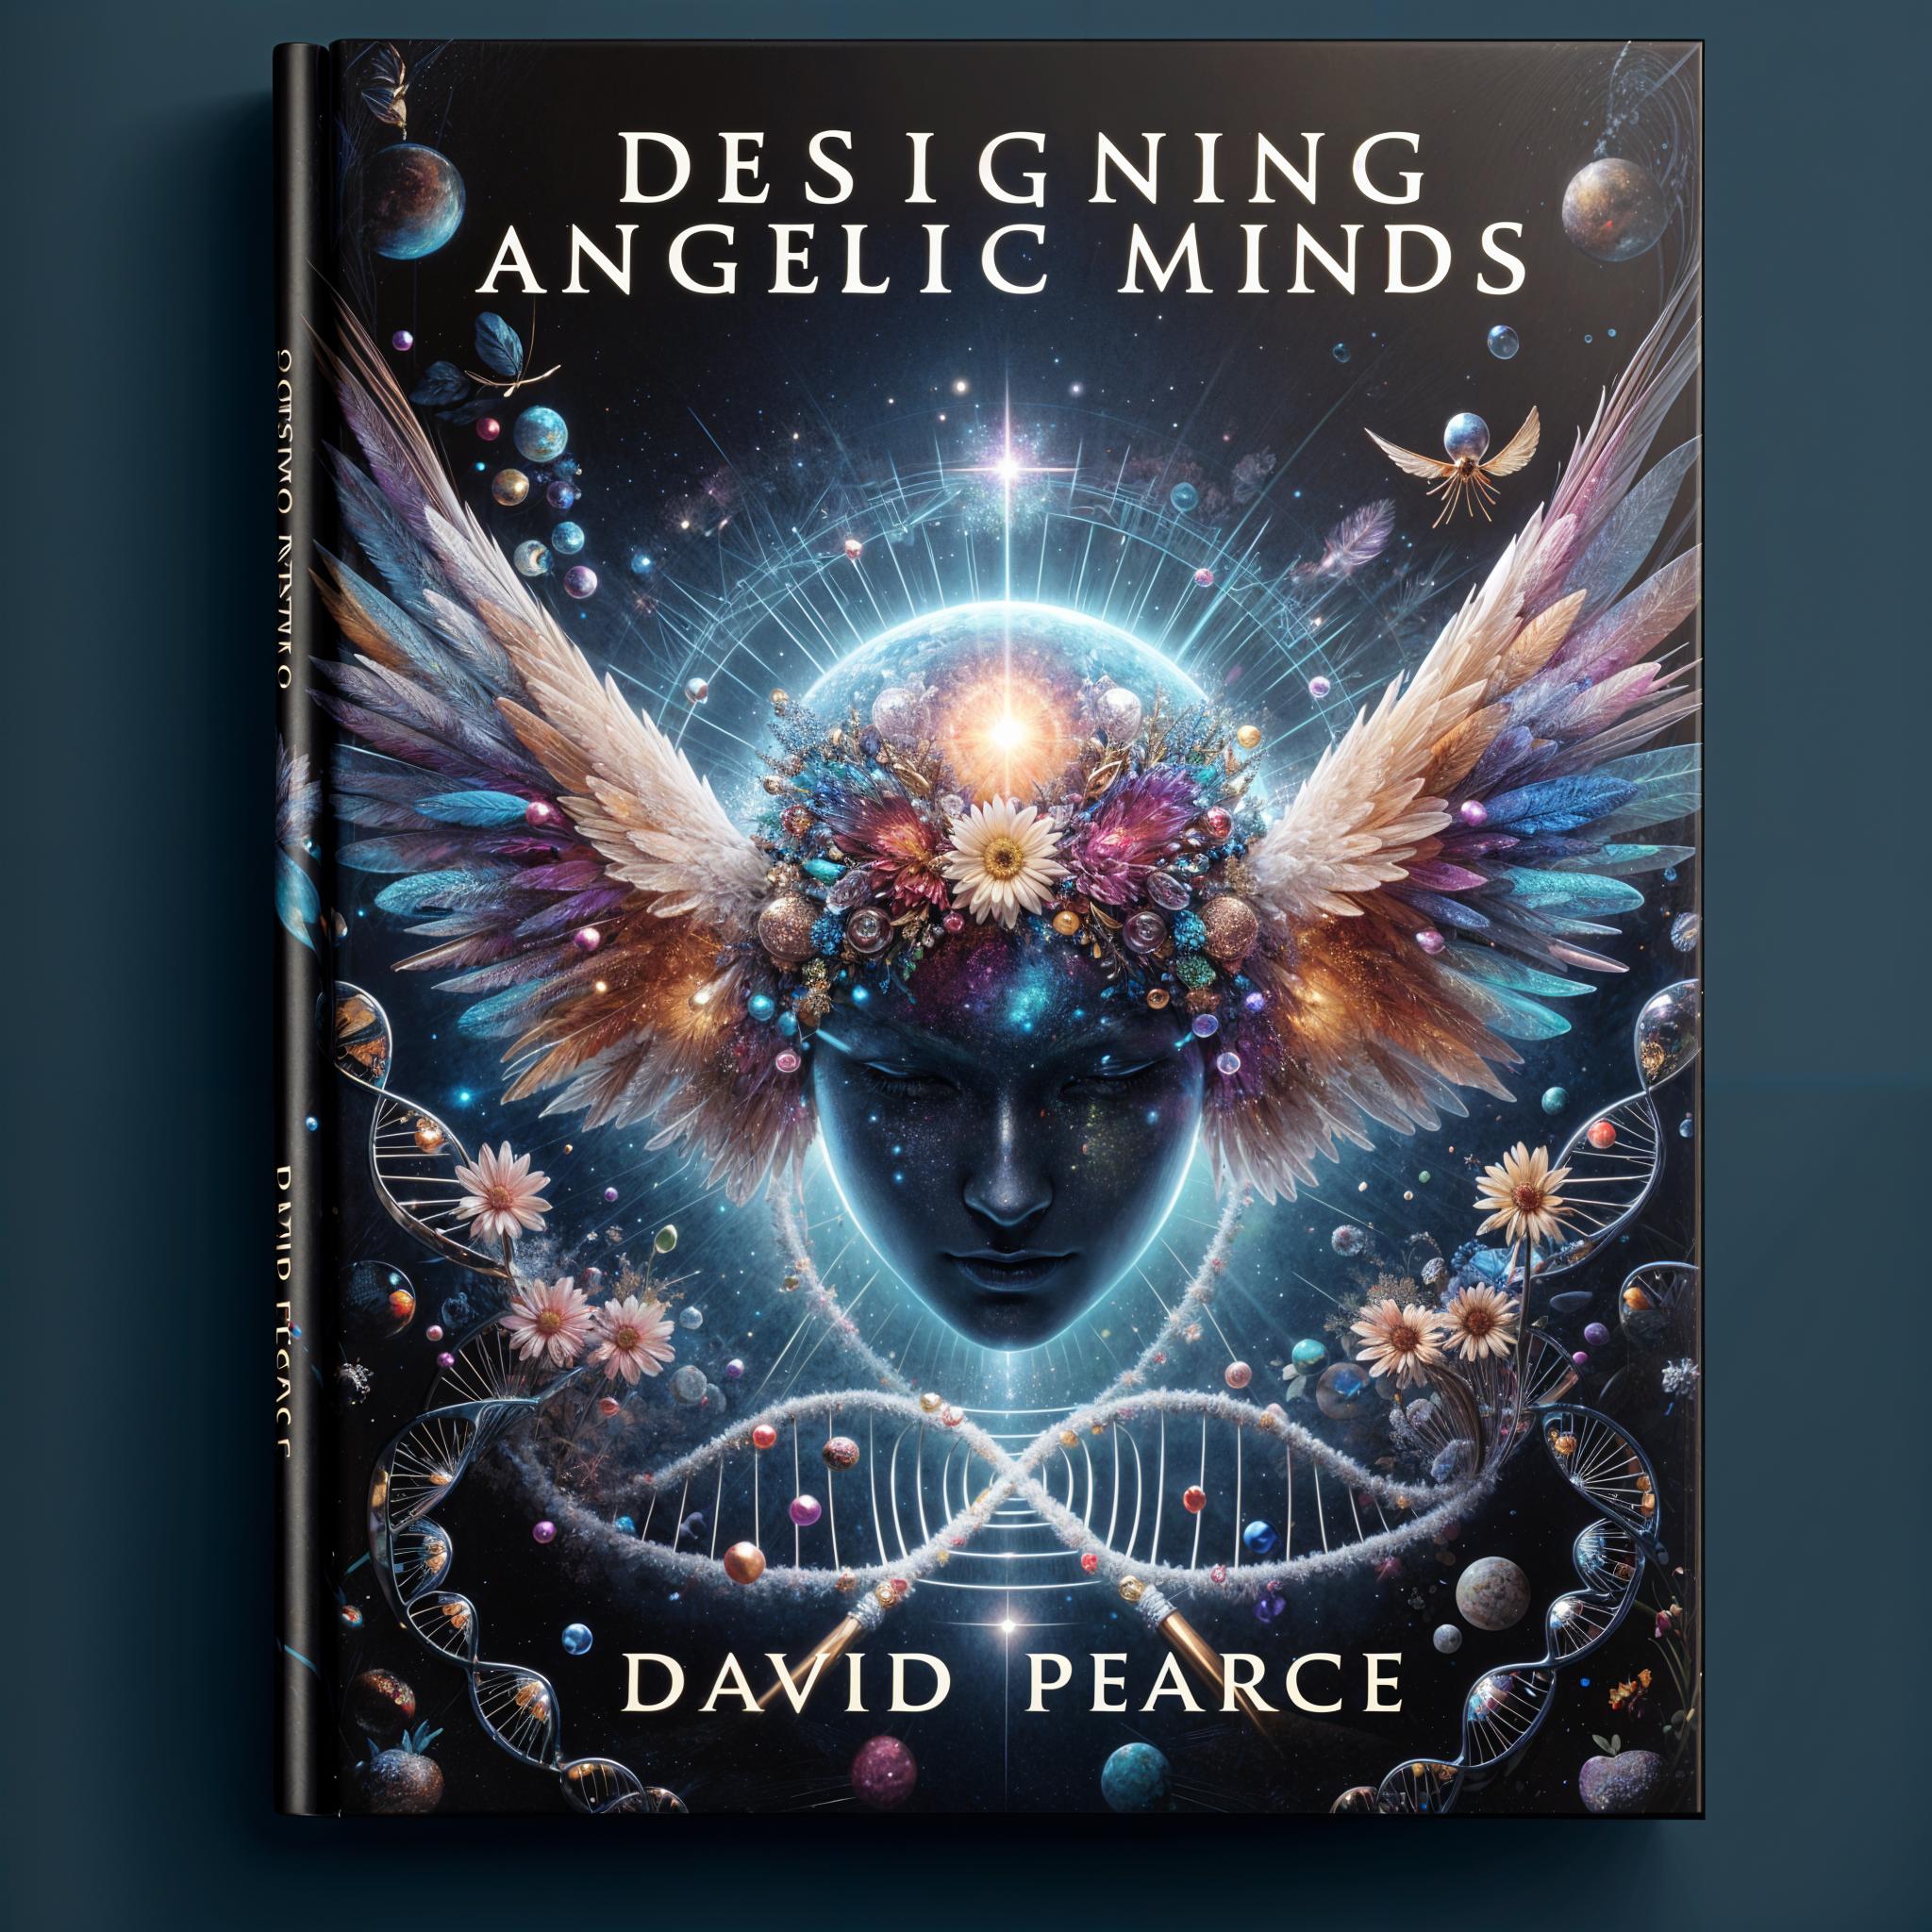 Designing Angelic Minds  by David Pearce